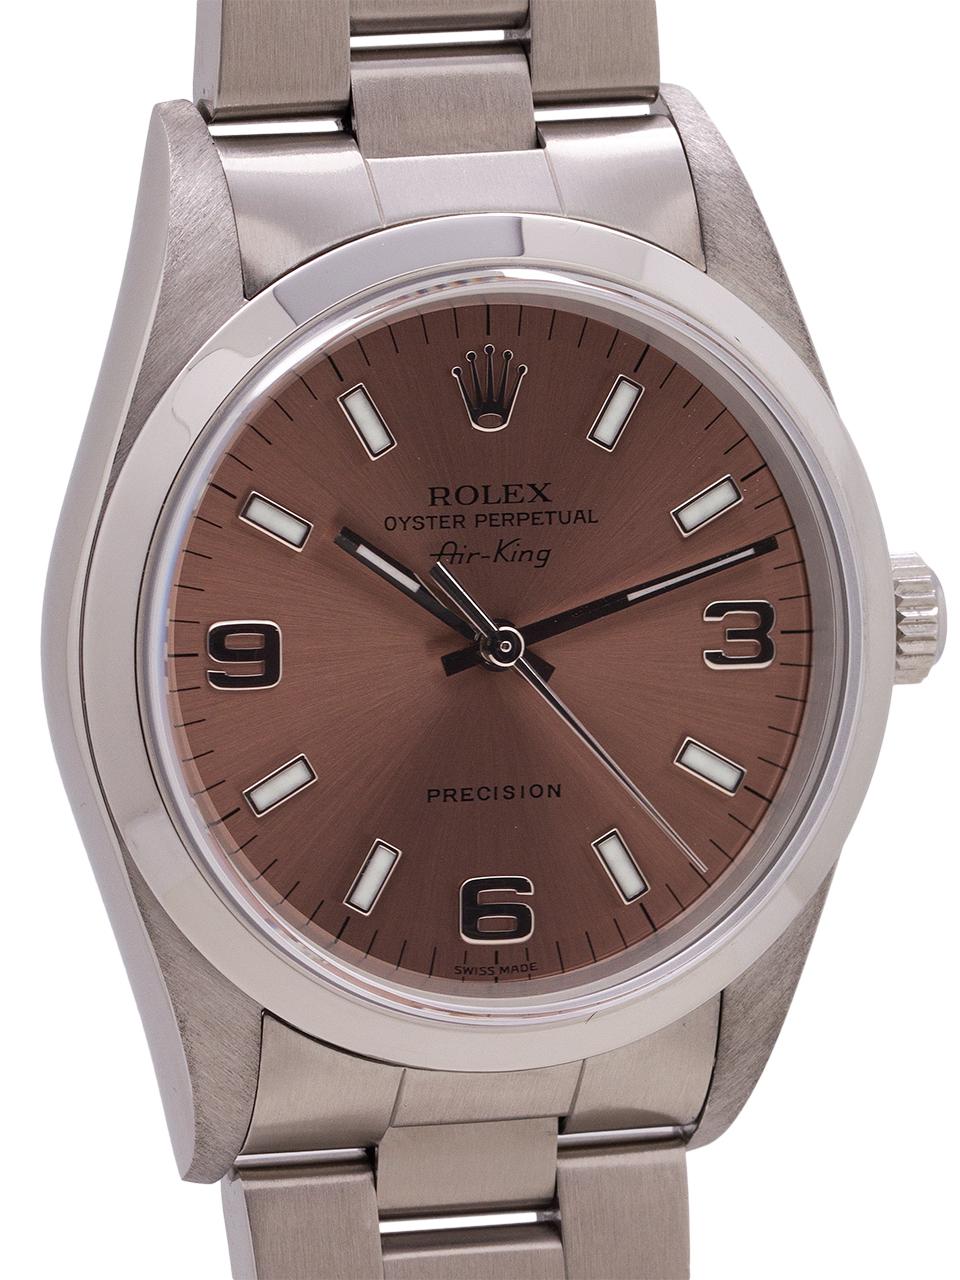 
Rolex Airking ref 14000 serial #P5  circa 2000. Featuring 34mm diameter stainless steel case with smooth bezel and sapphire crystal. With popular salmon (rose) 3/6/9 Explorer style dial with luminous indexes and hands. Powered by self winding